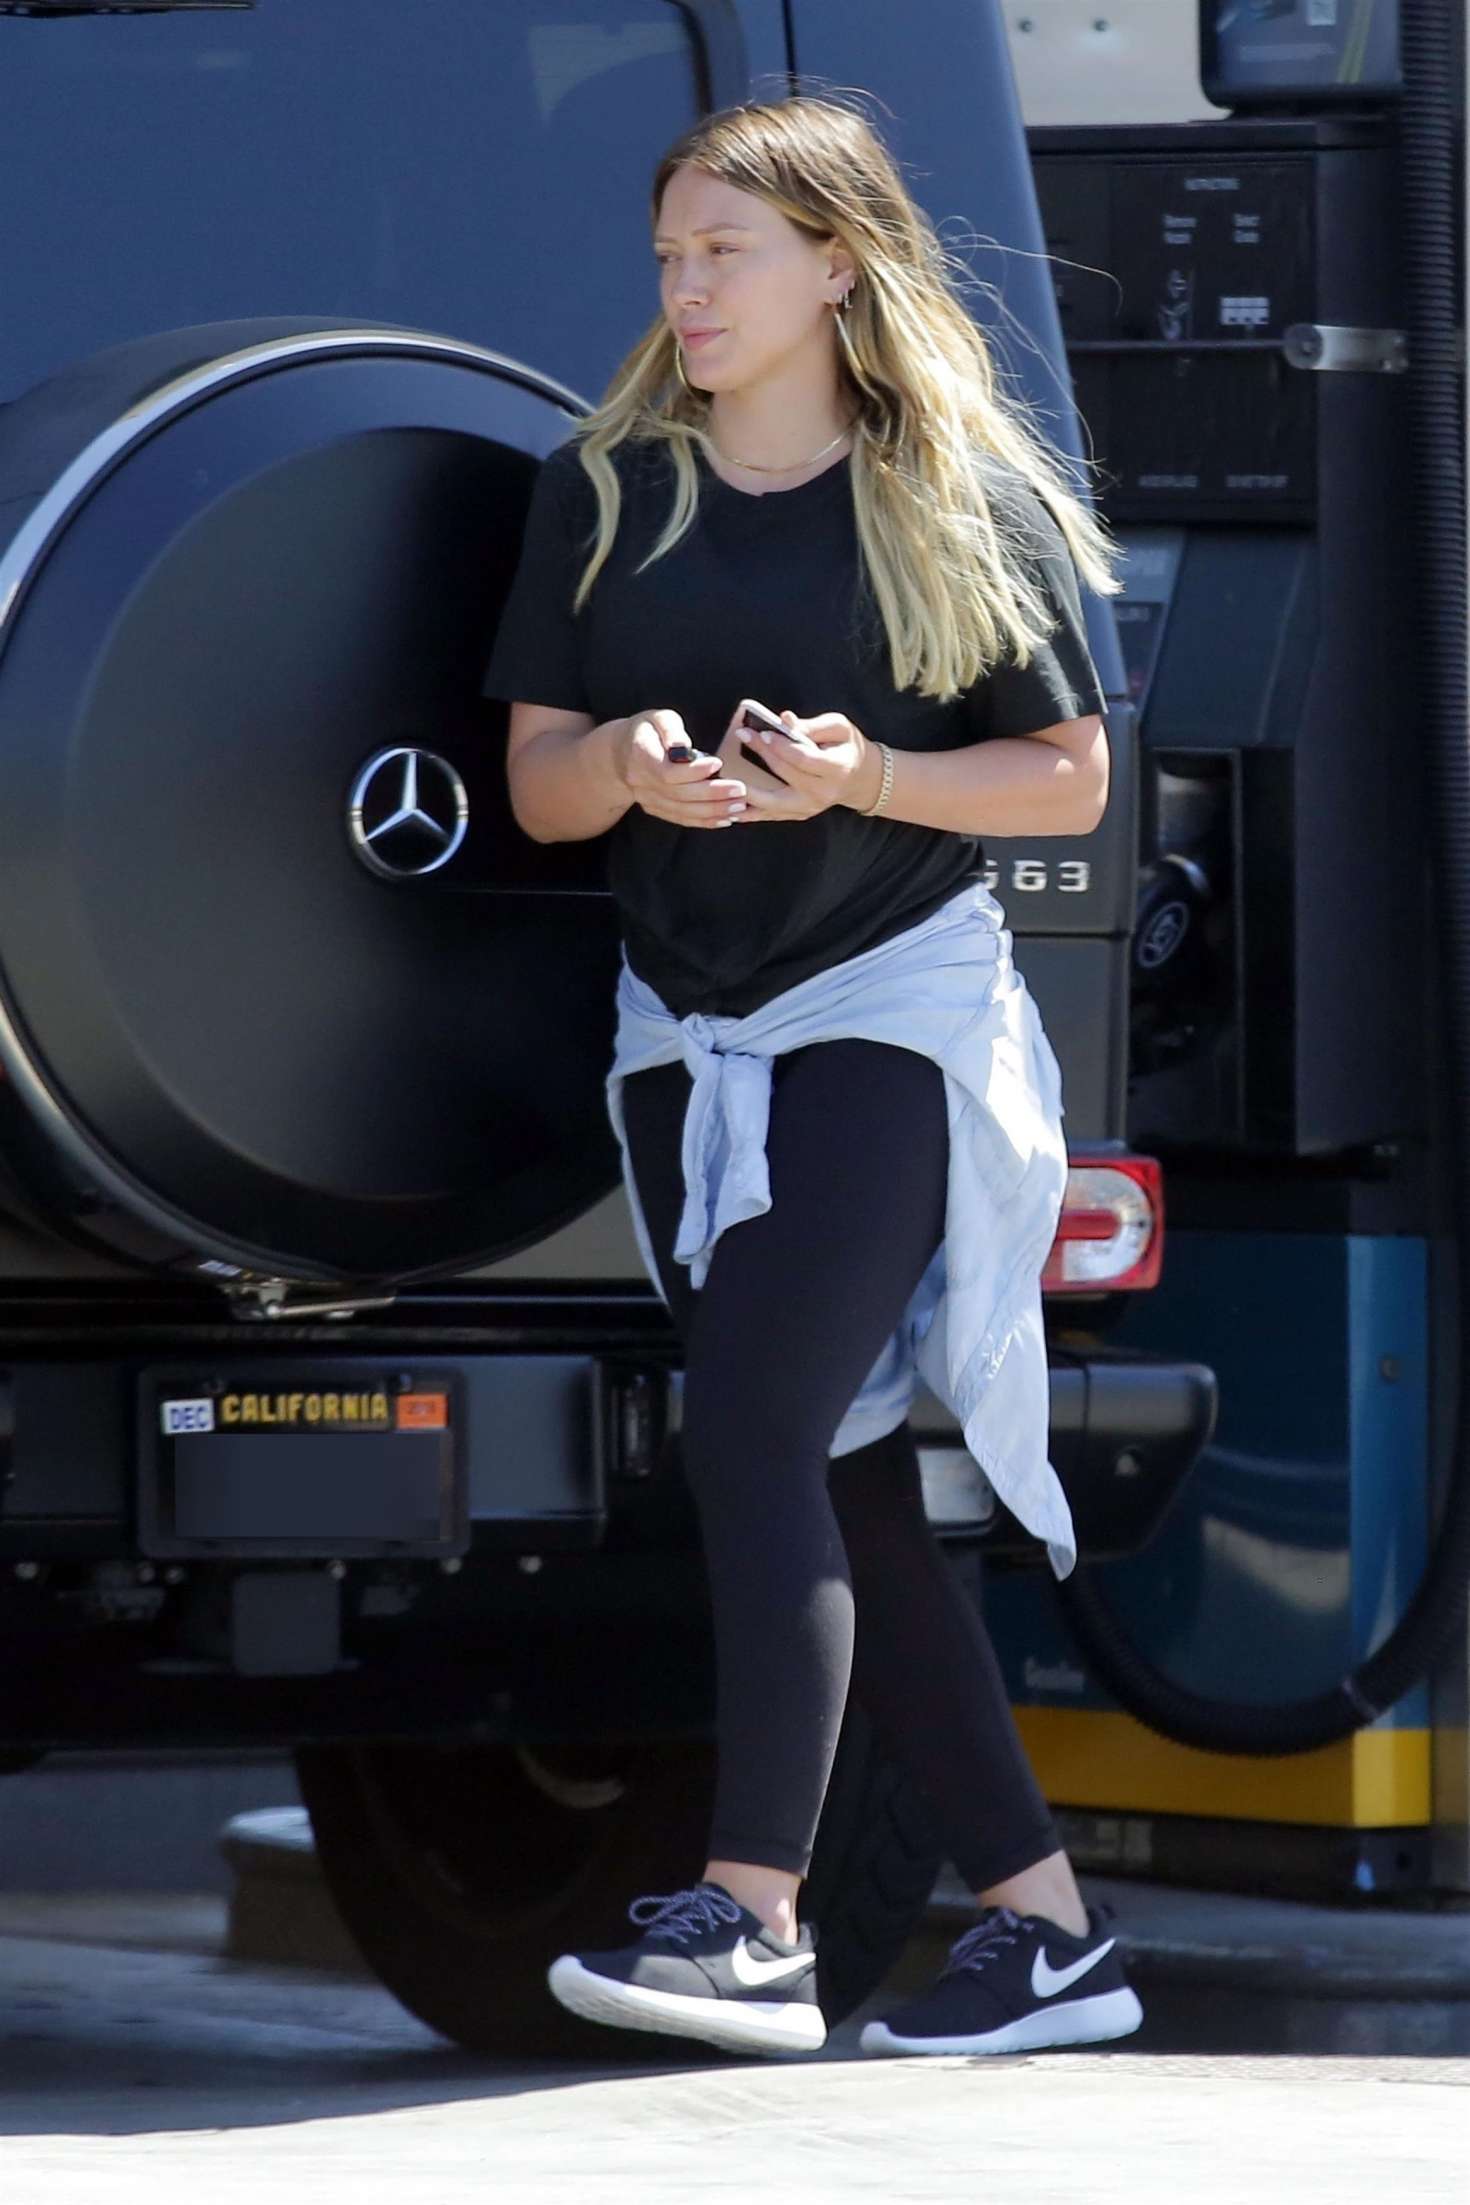 Hilary Duff at a gas station in Los Angeles